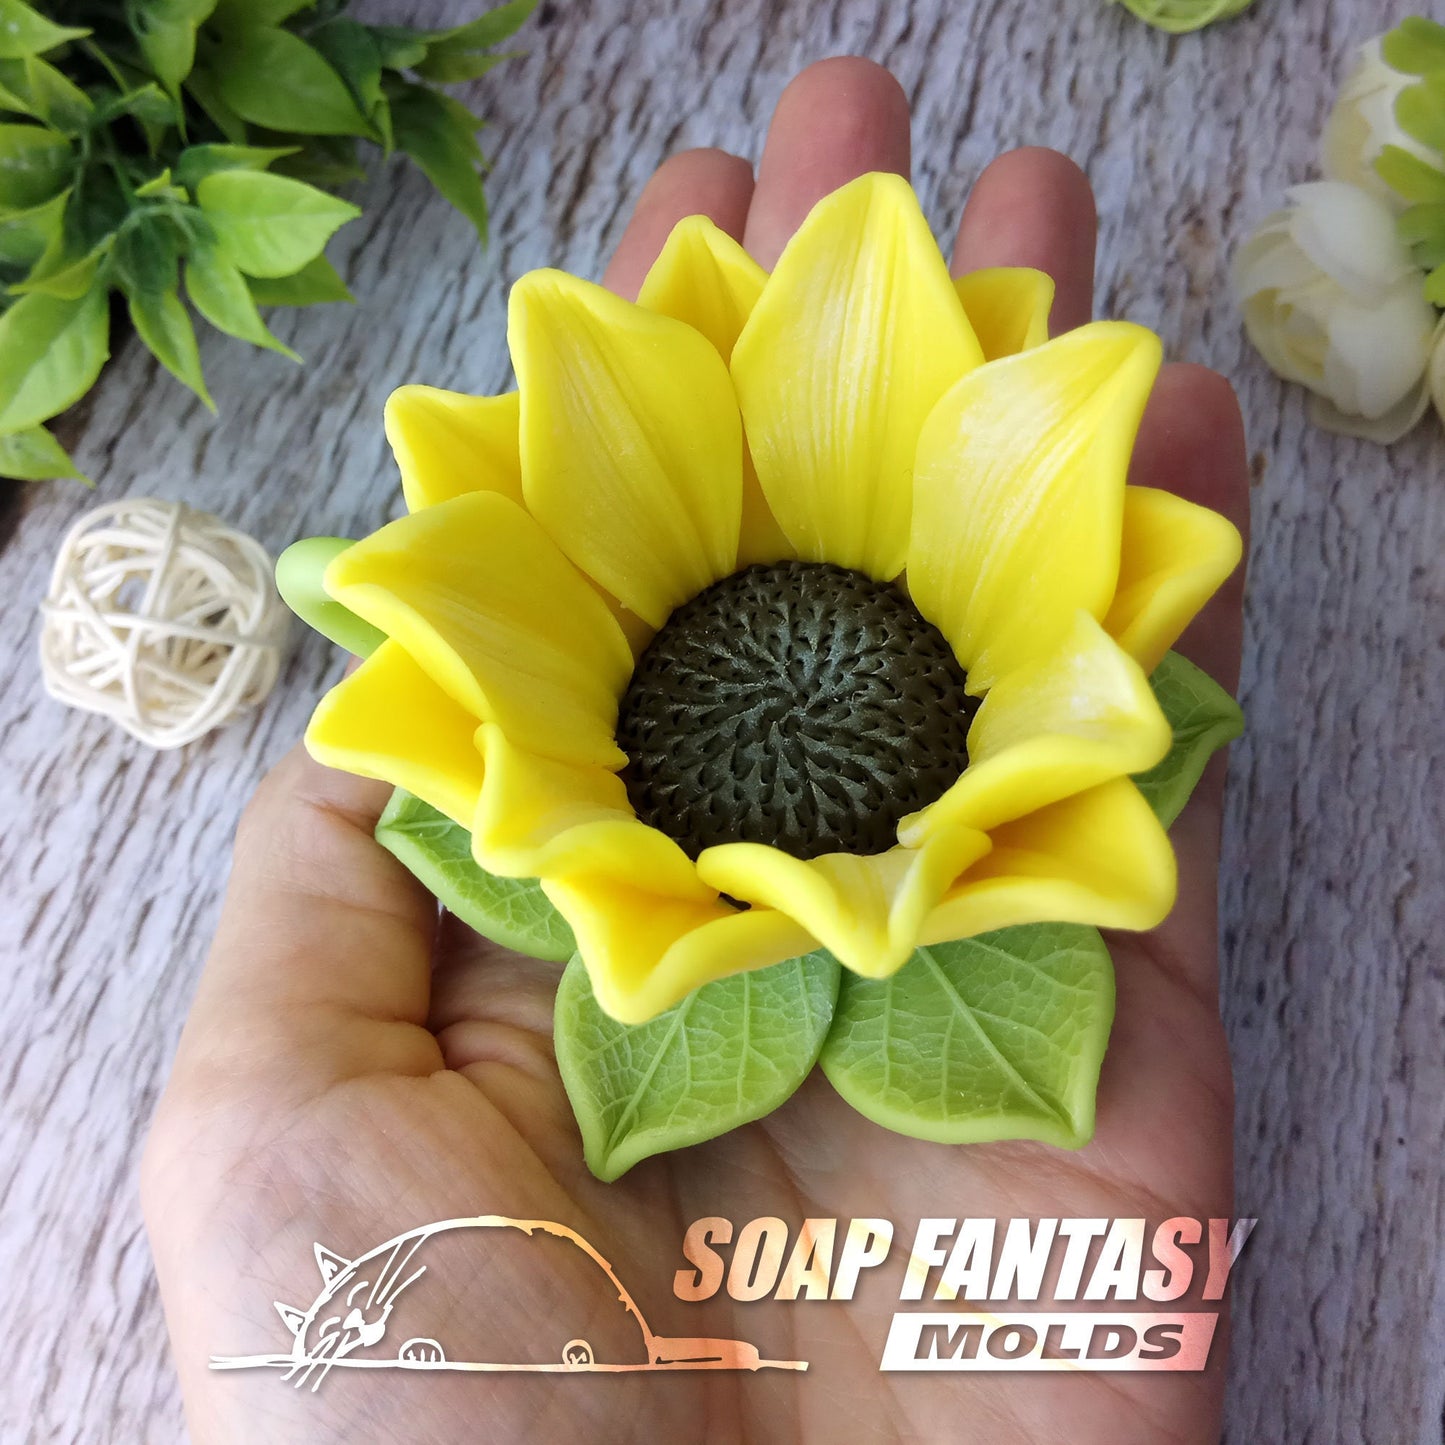 Sunflower cup and saucer silicone mold for soap making